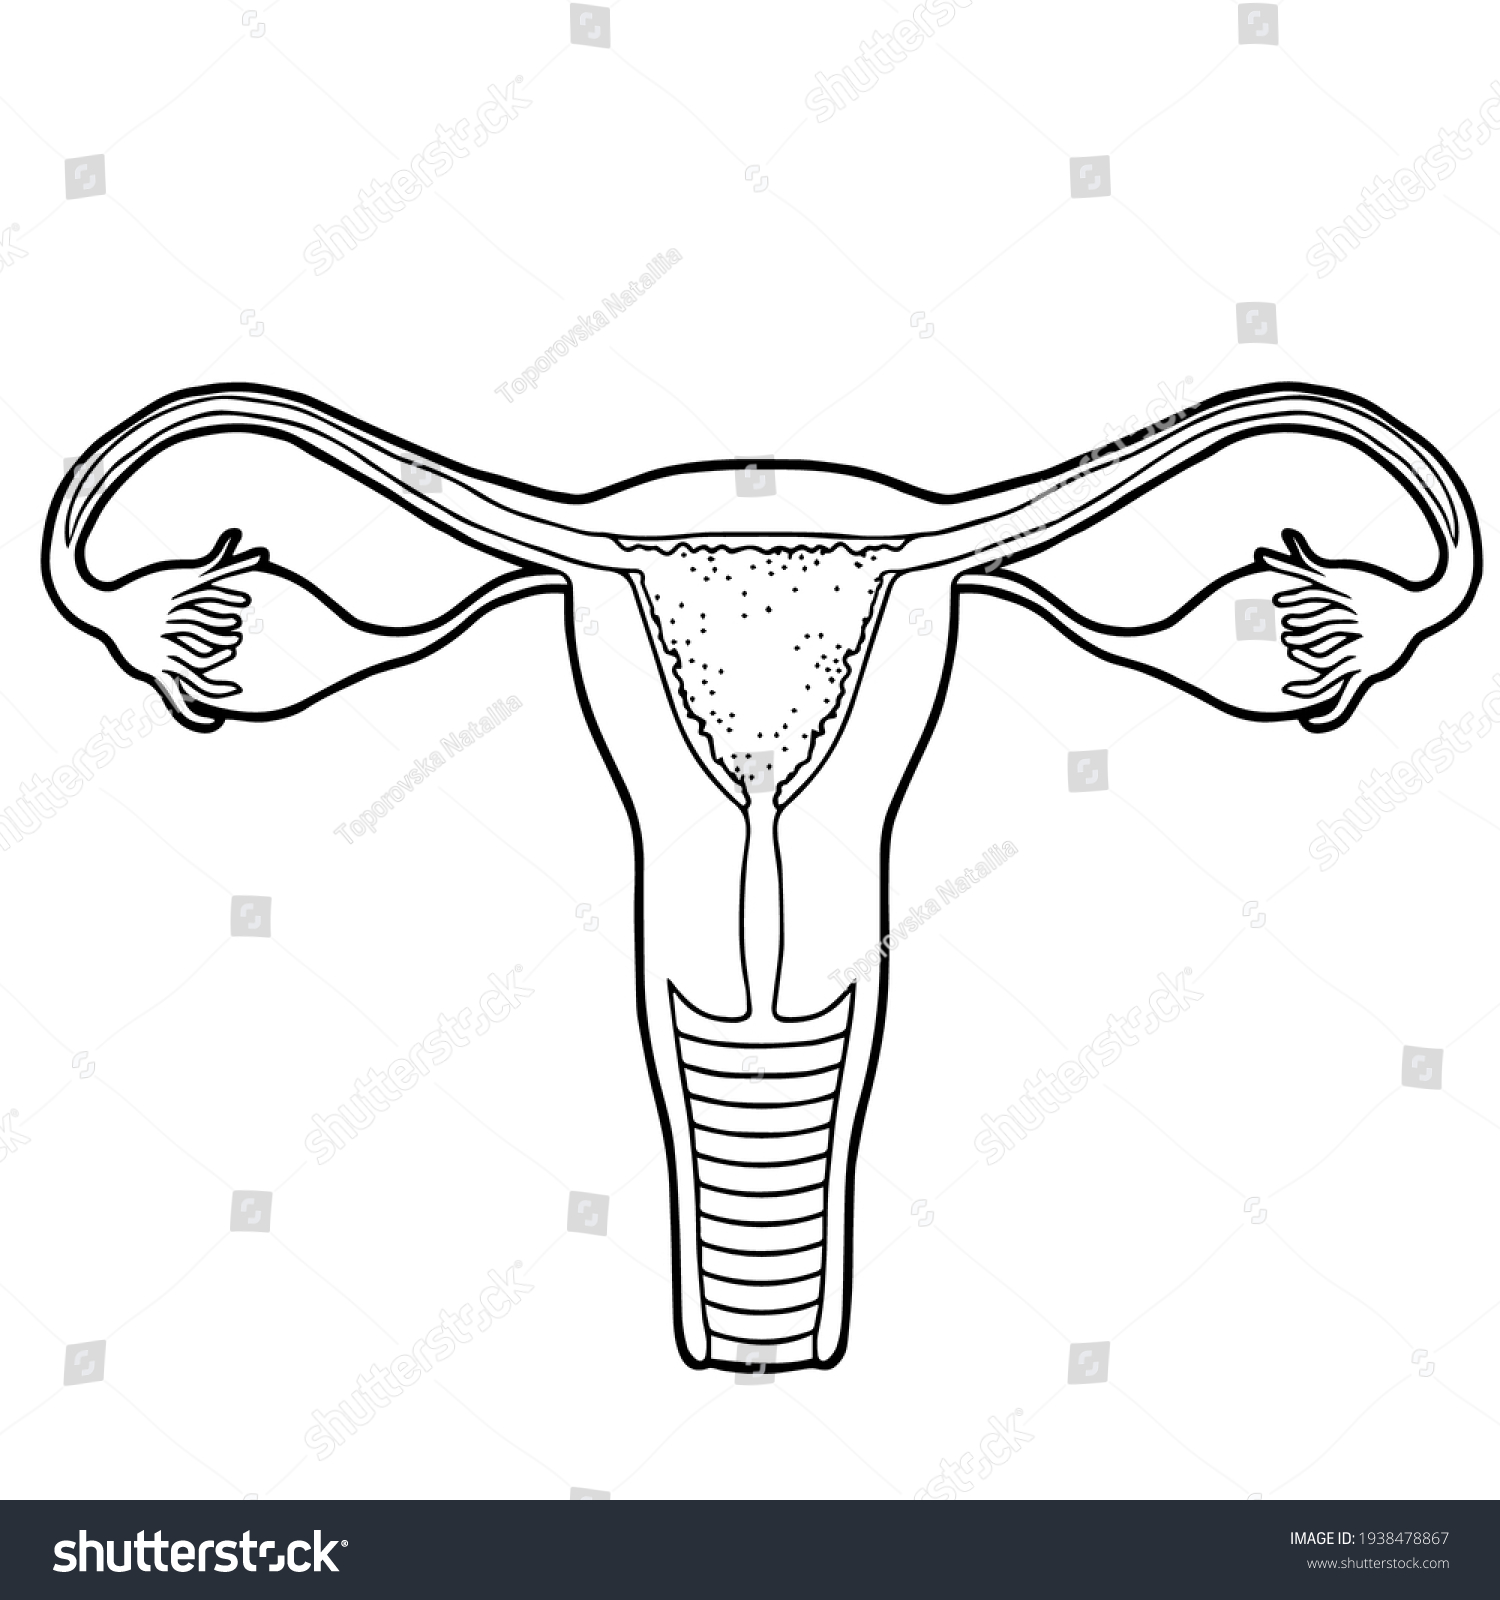 Healthy Beauty Female Reproductive System Stock Vector Royalty Free 1938478867 Shutterstock 4834